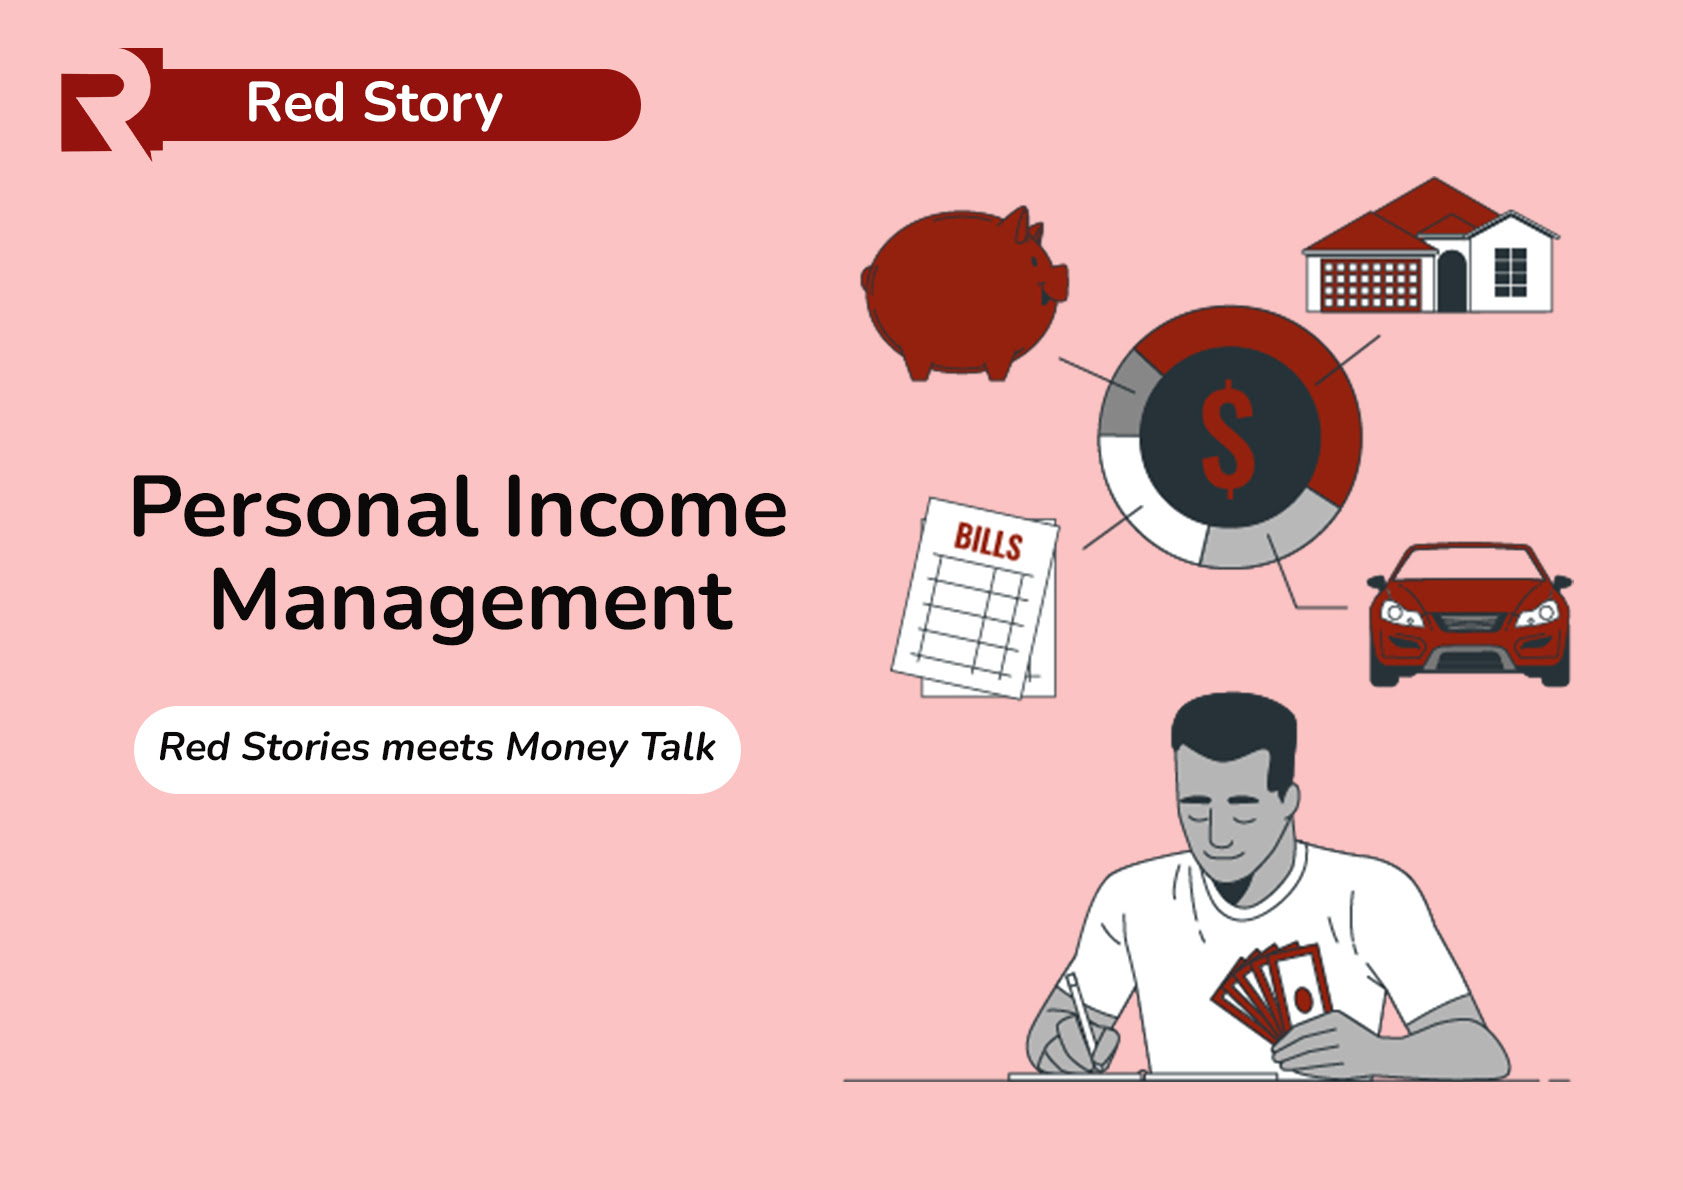 Personal Income Management